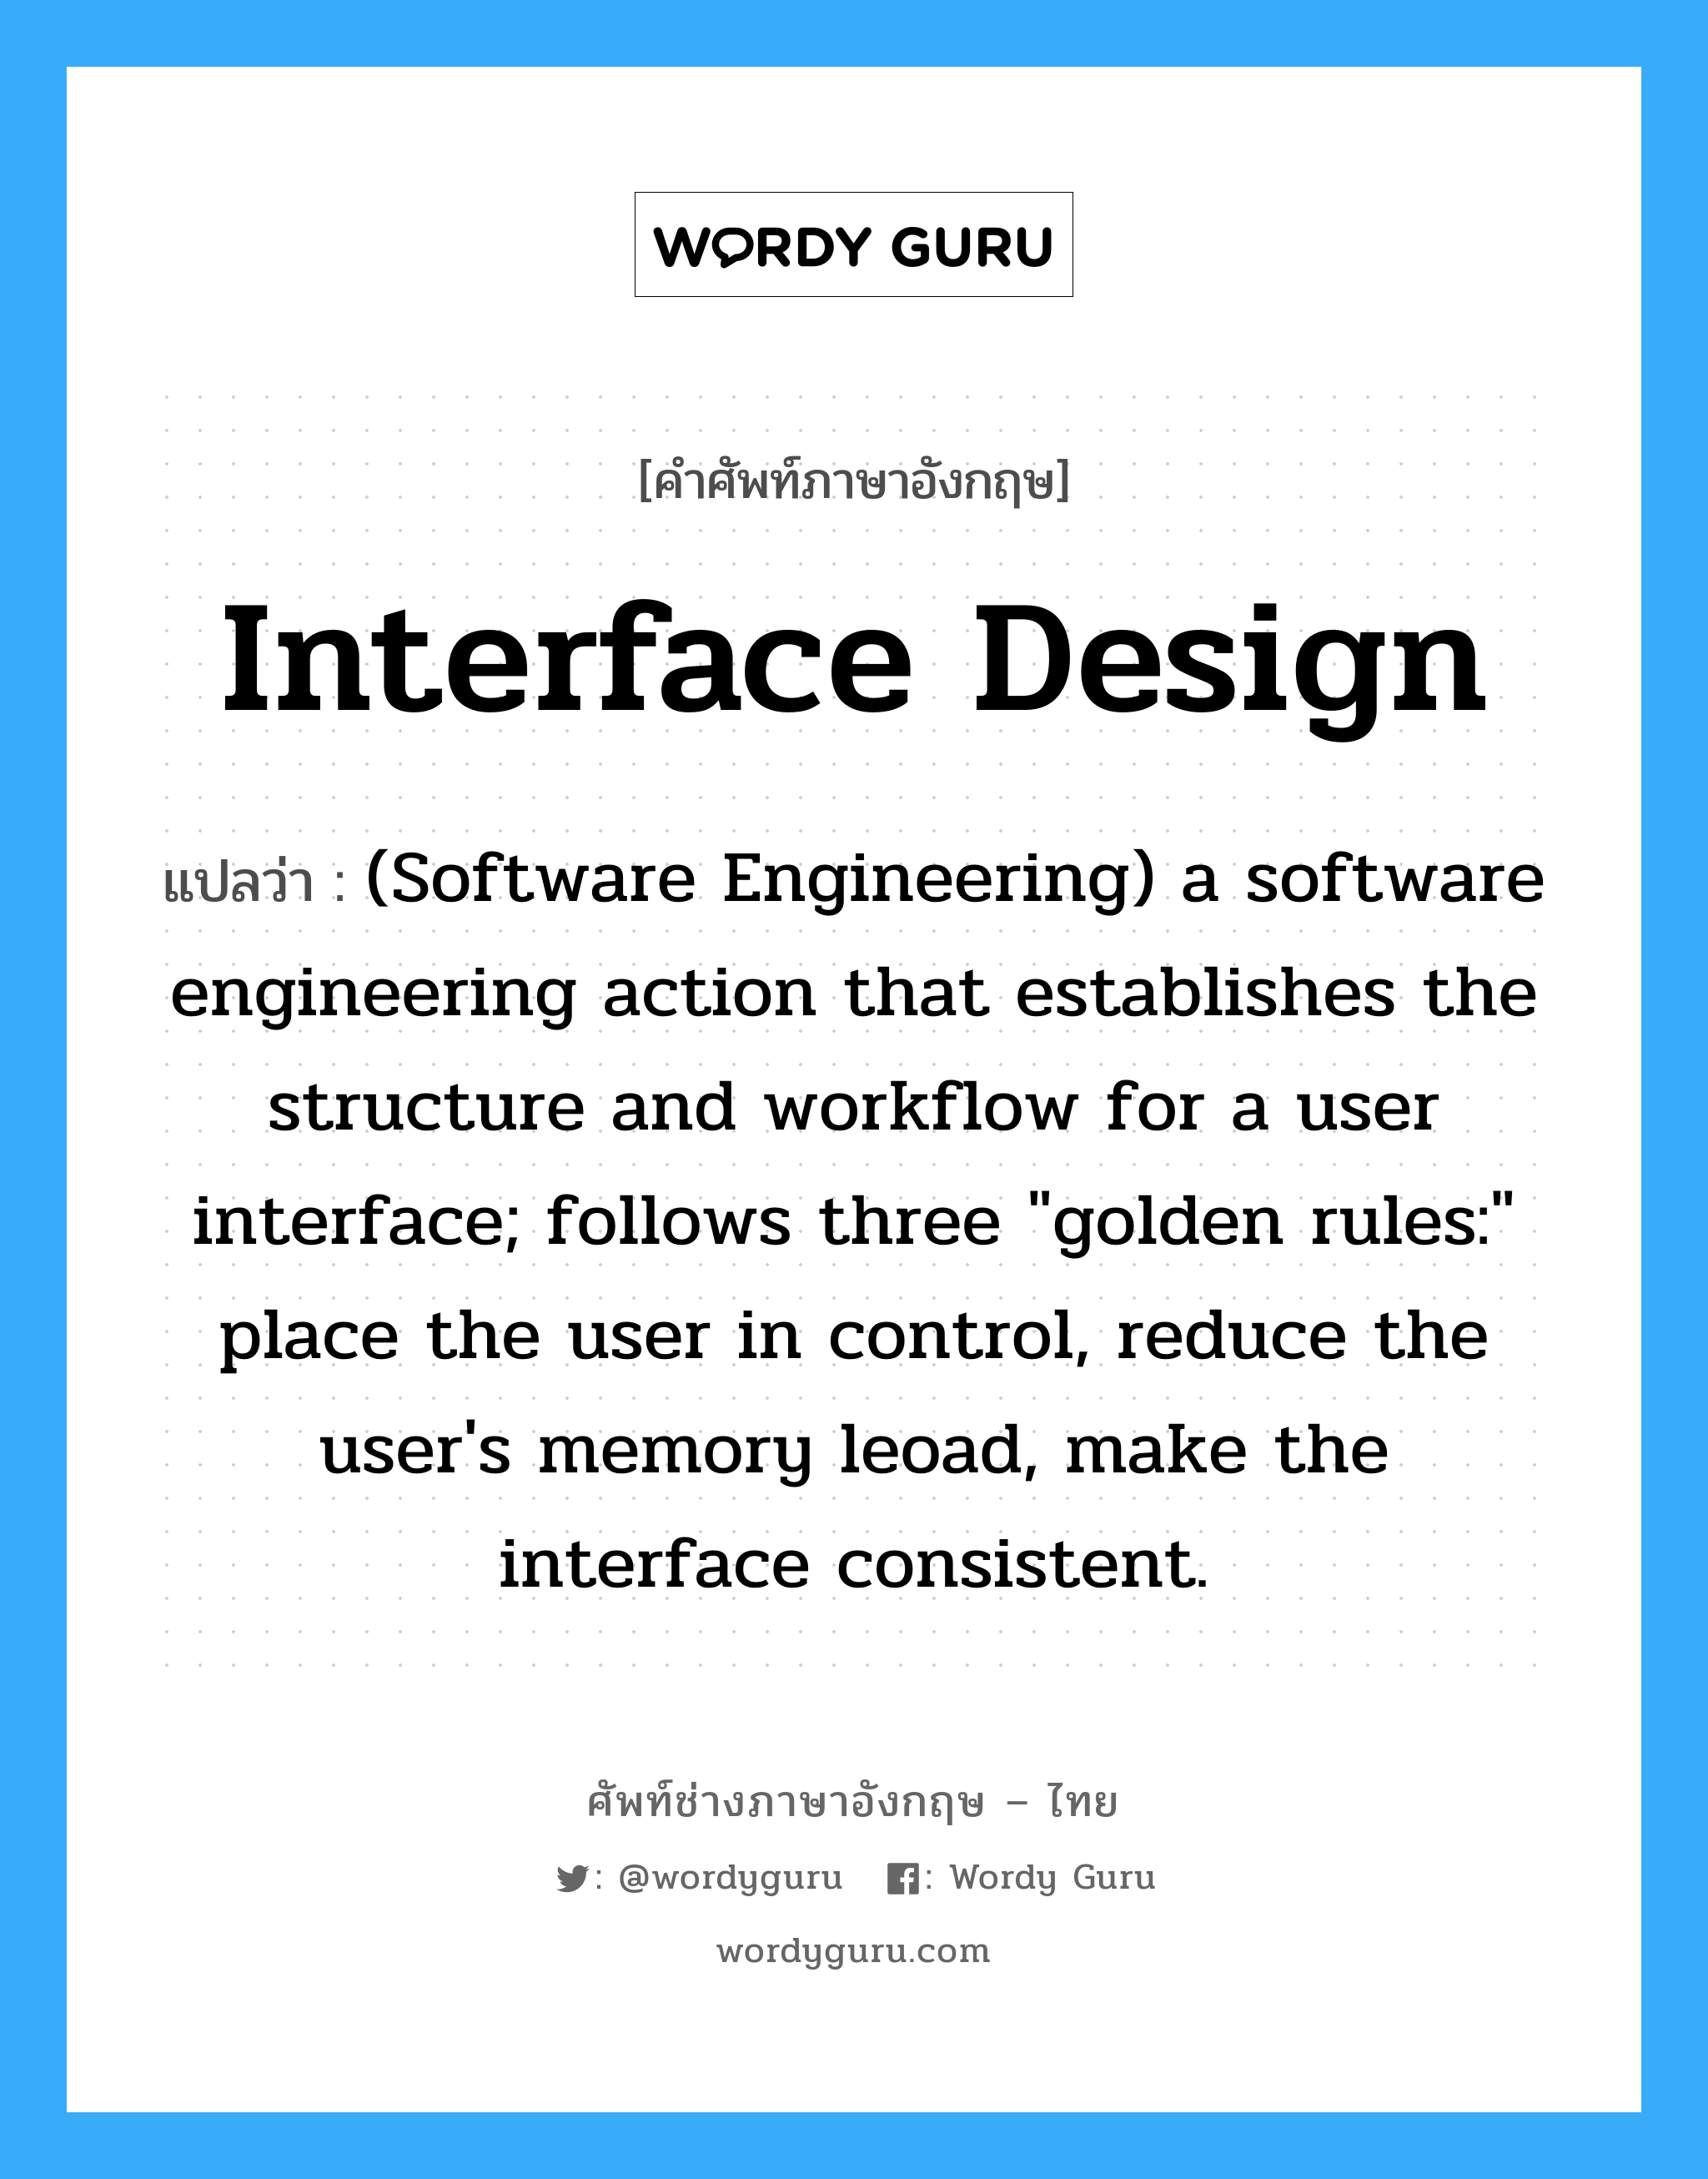 (Software Engineering) a software engineering action that establishes the structure and workflow for a user interface; follows three "golden rules:" place the user in control, reduce the user's memory leoad, make the interface consistent. ภาษาอังกฤษ?, คำศัพท์ช่างภาษาอังกฤษ - ไทย (Software Engineering) a software engineering action that establishes the structure and workflow for a user interface; follows three "golden rules:" place the user in control, reduce the user's memory leoad, make the interface consistent. คำศัพท์ภาษาอังกฤษ (Software Engineering) a software engineering action that establishes the structure and workflow for a user interface; follows three "golden rules:" place the user in control, reduce the user's memory leoad, make the interface consistent. แปลว่า Interface design